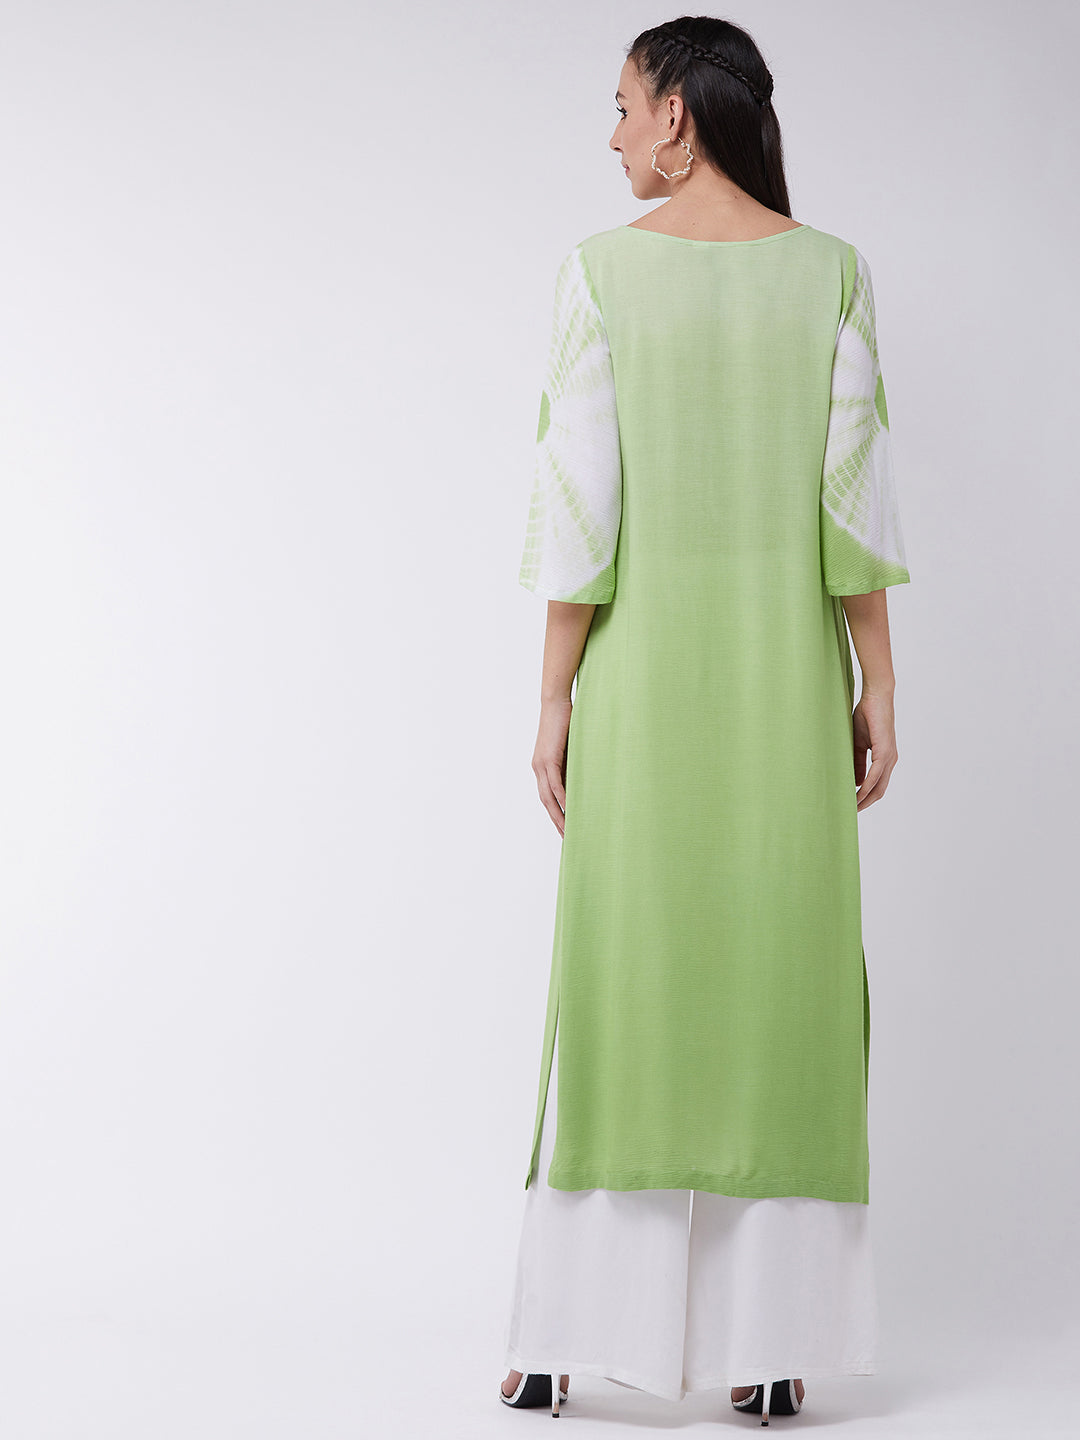 Ombre Tie-Dye Embroidered Kurta